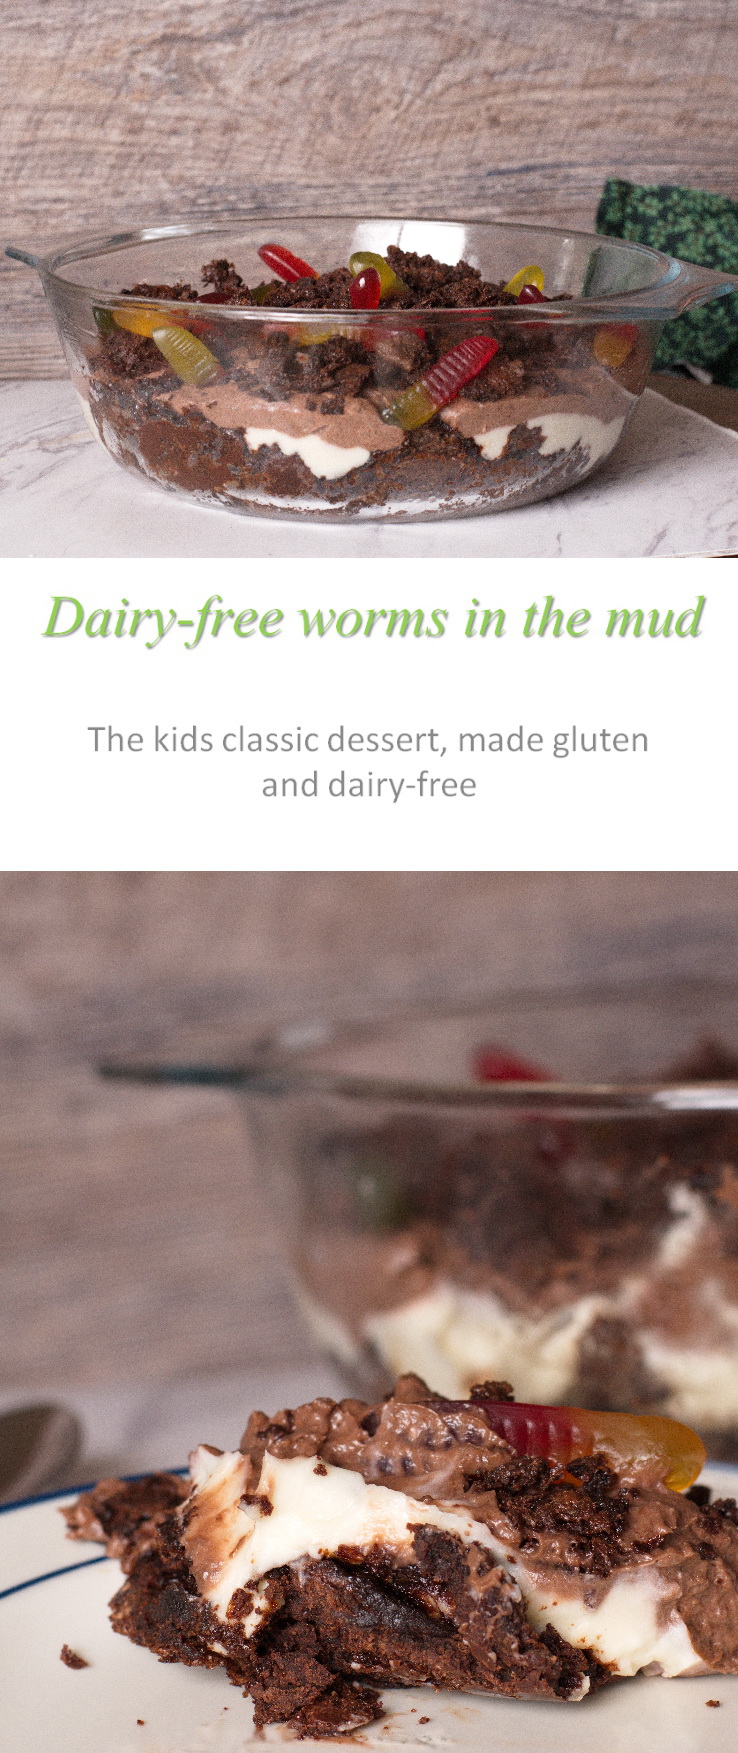 Sounds strange, but amazingly not too rich for a dessert, this worms in the mud recipe can be adapted in many ways! #dessert #glutenfree #dairyfree #cookathome